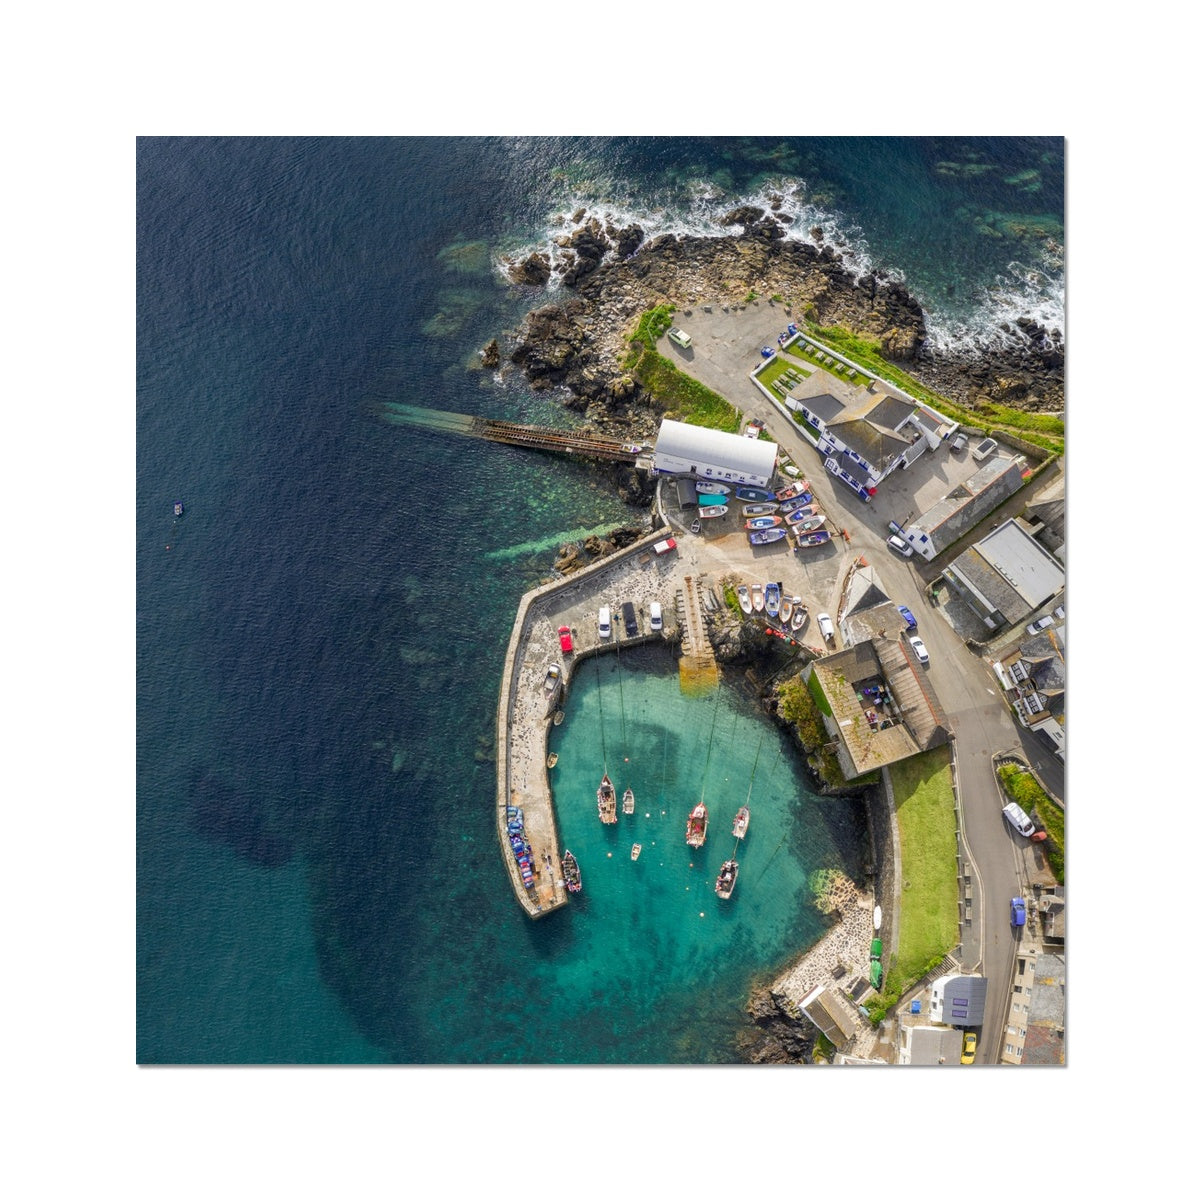 coverack from above